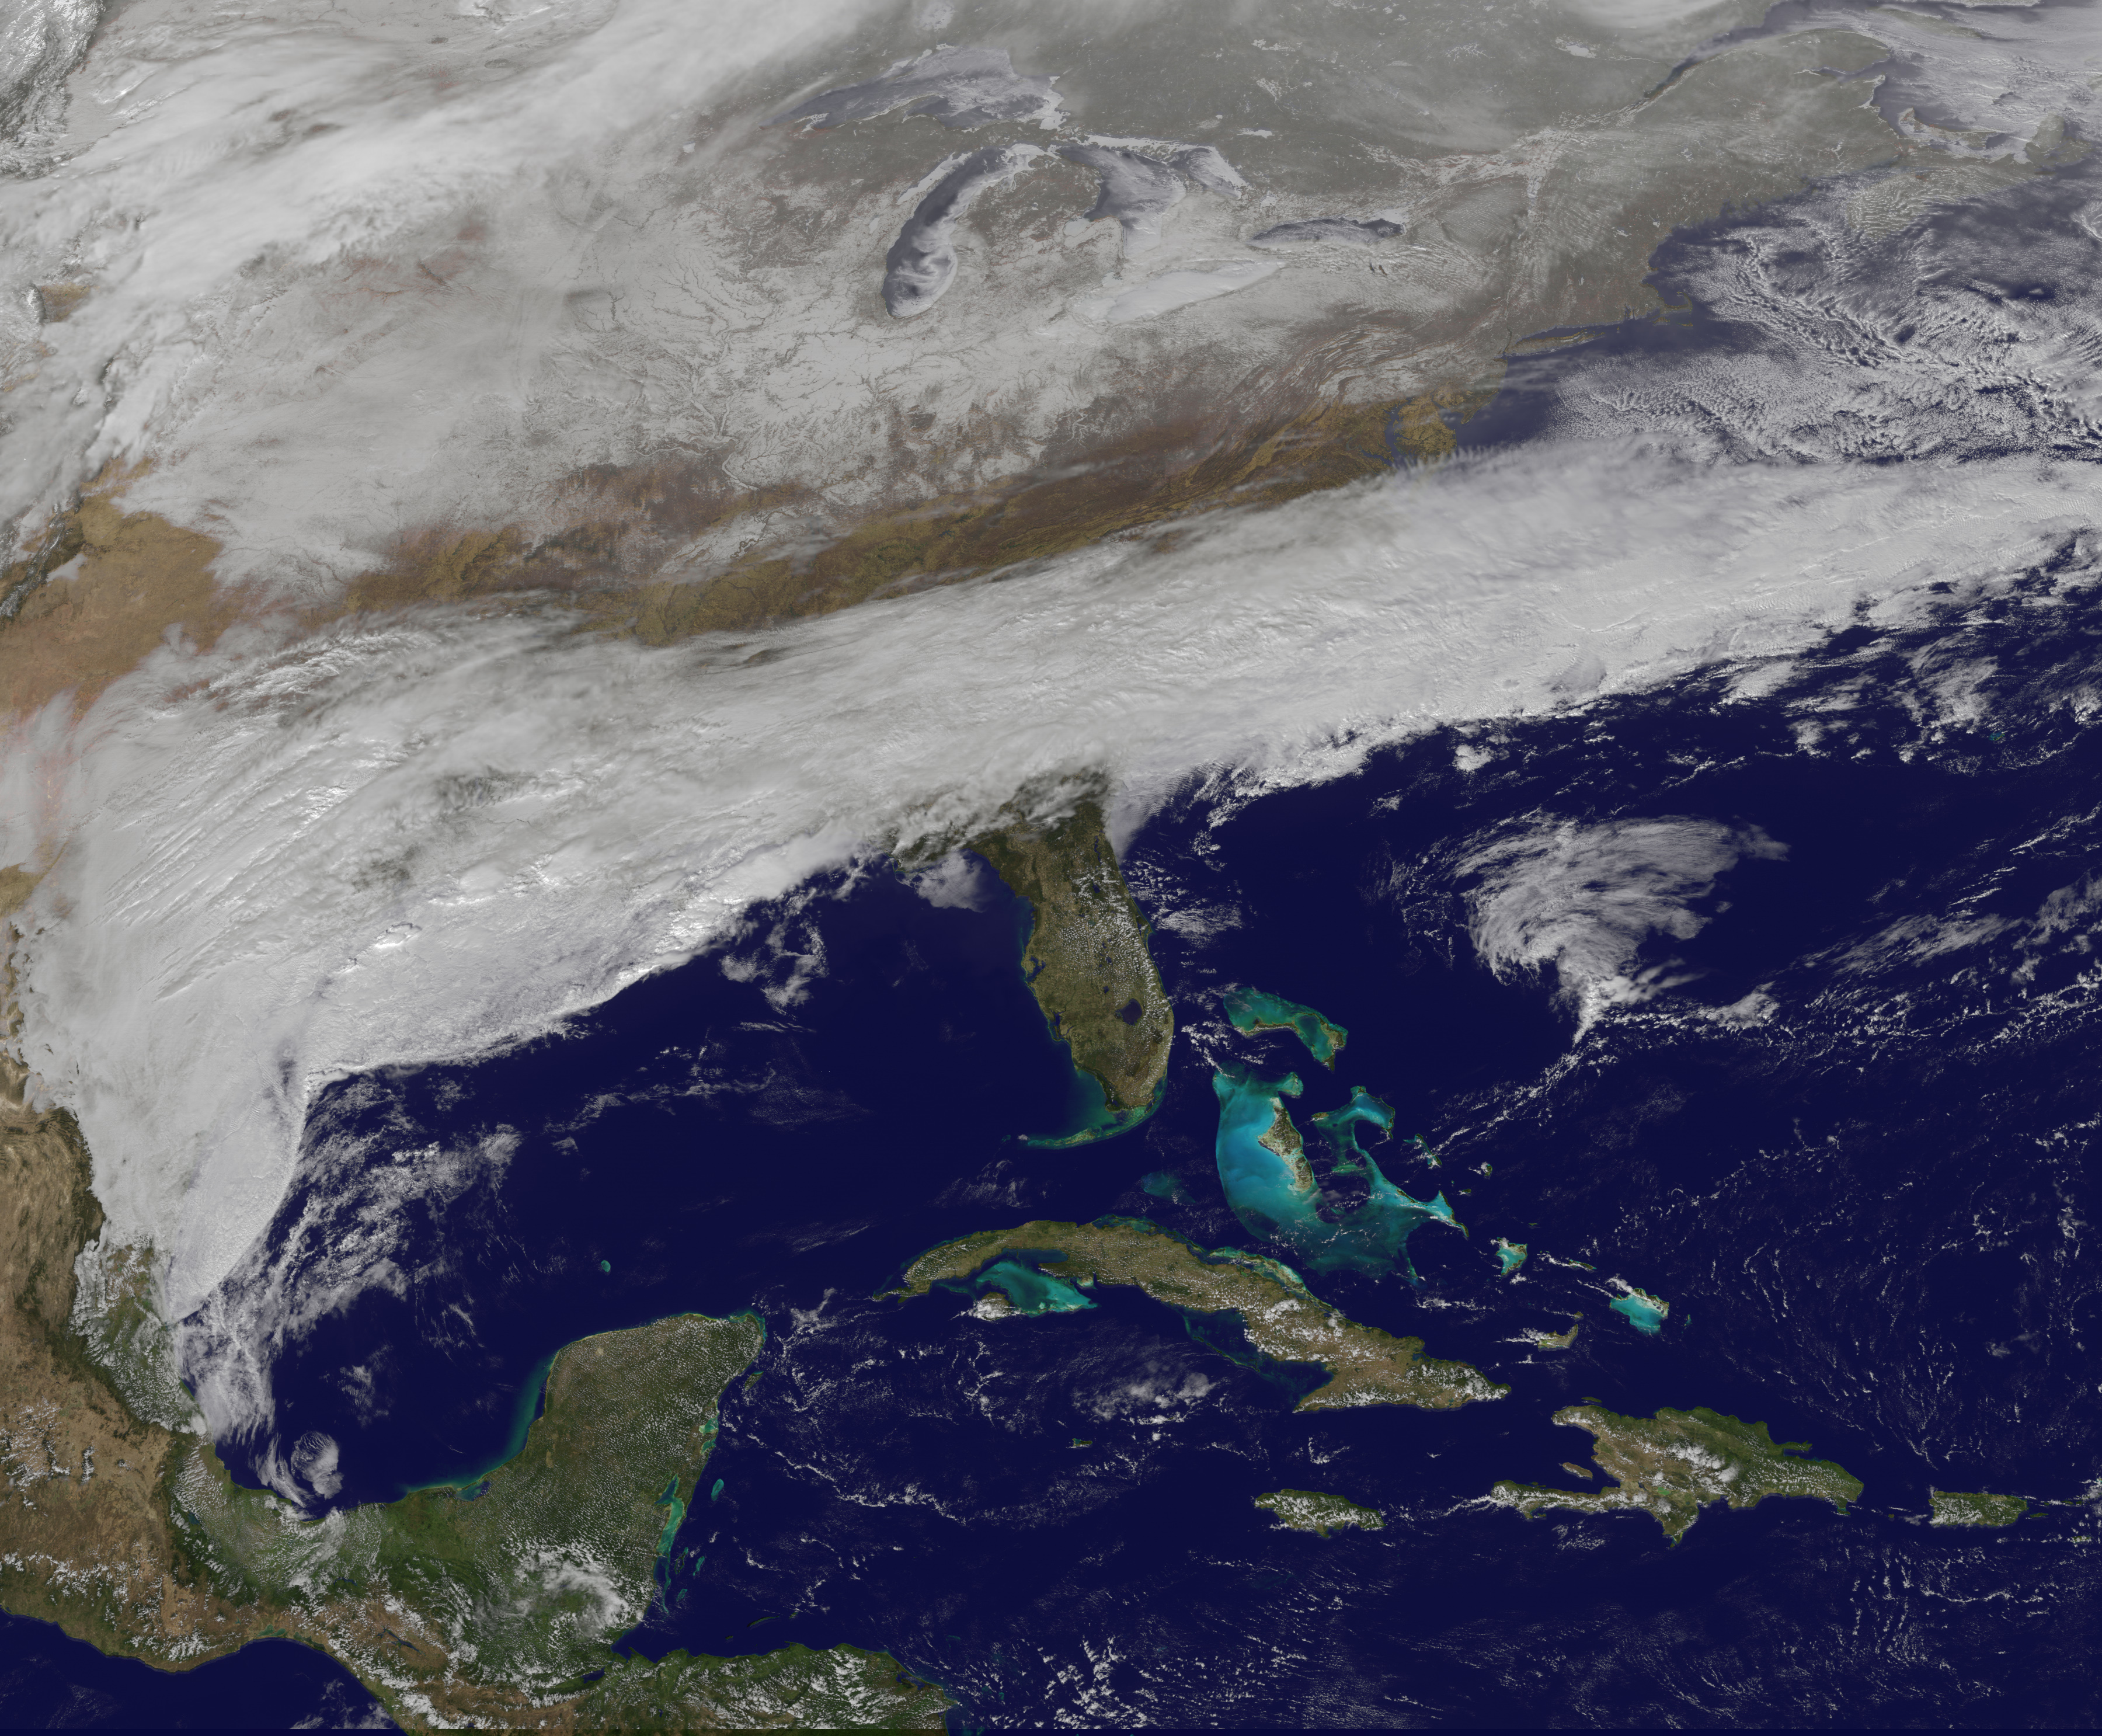 Snowstorm Approaching the Southeastern United States - related image preview